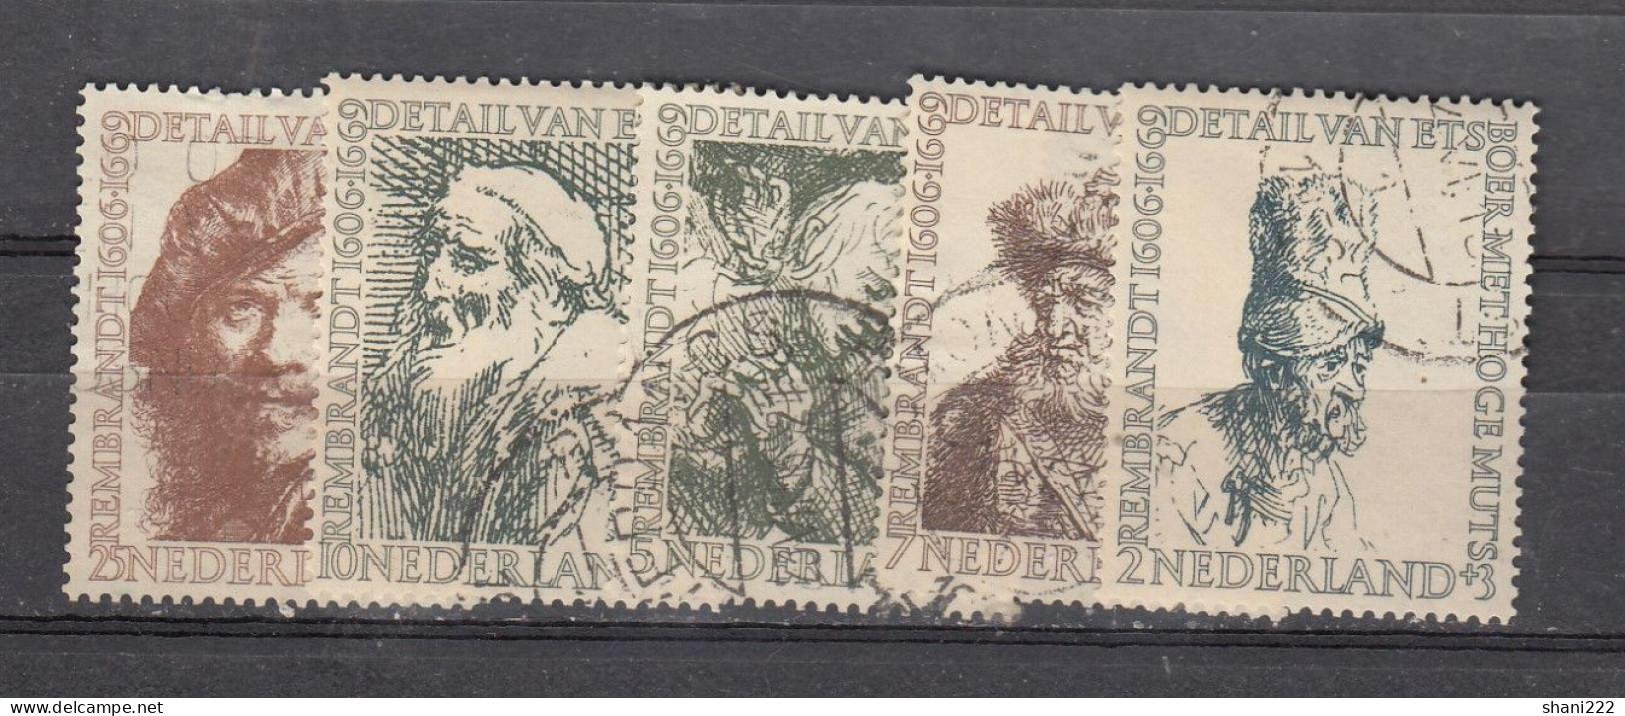 Netherlands 1956 Charity - Rembrandt  Used Set (e-851) - Gebraucht